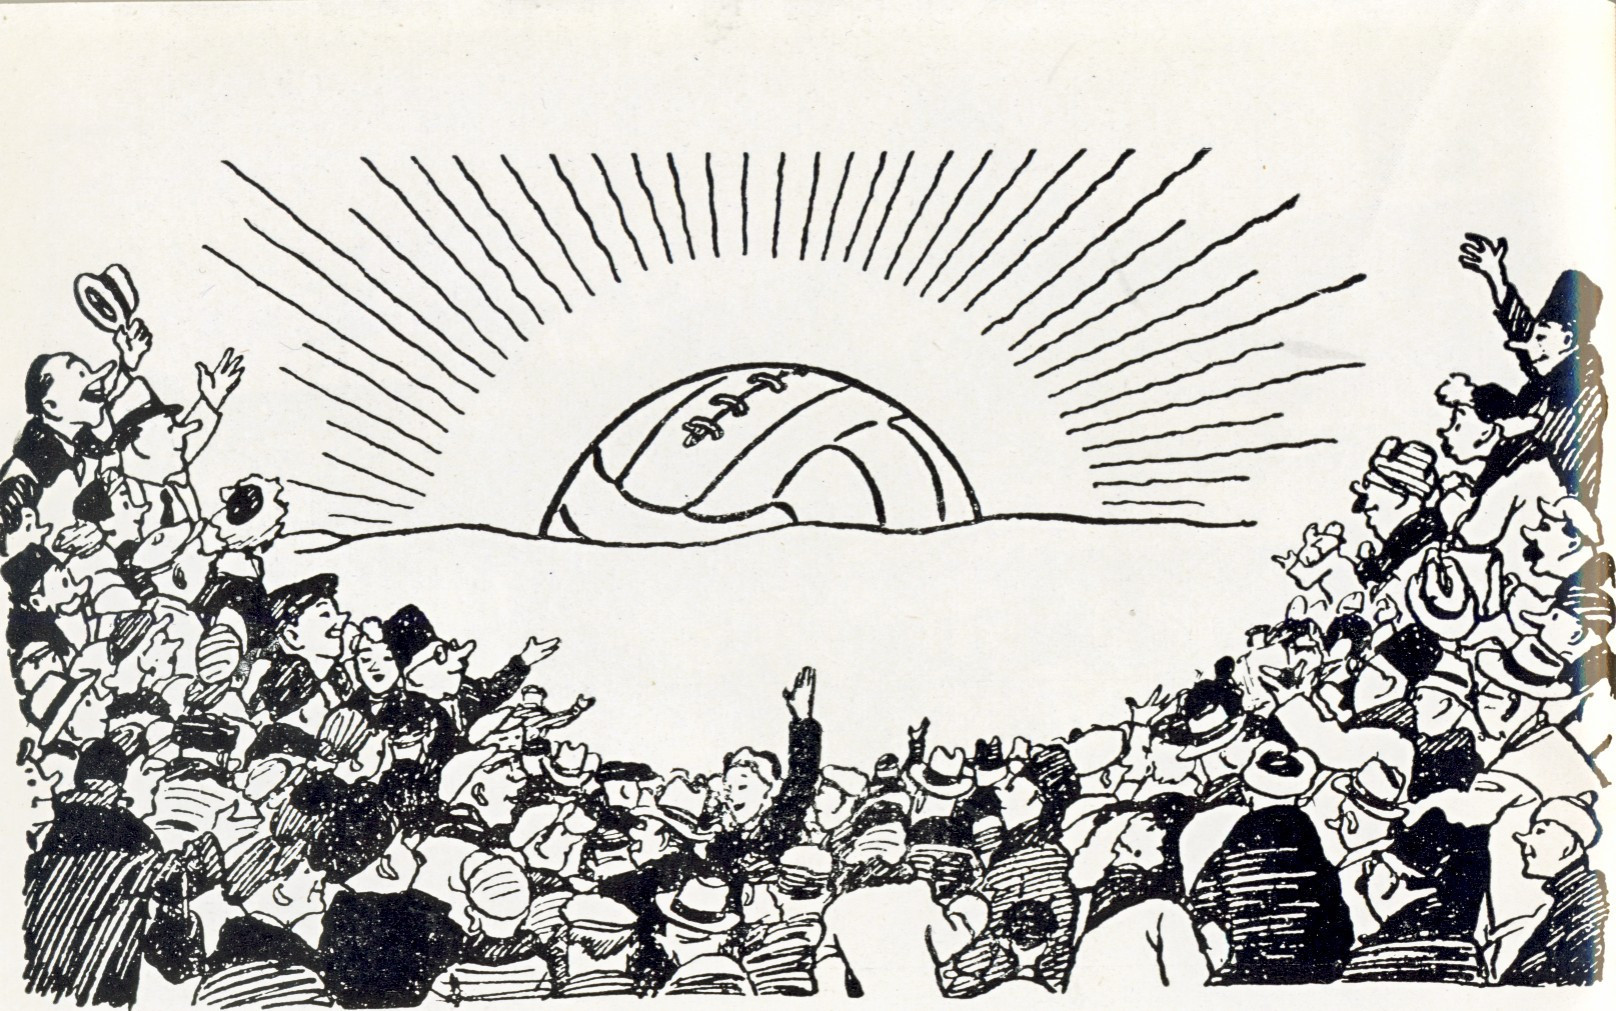 A Soviet cartoon depicting the growing rise of football as a national treasure